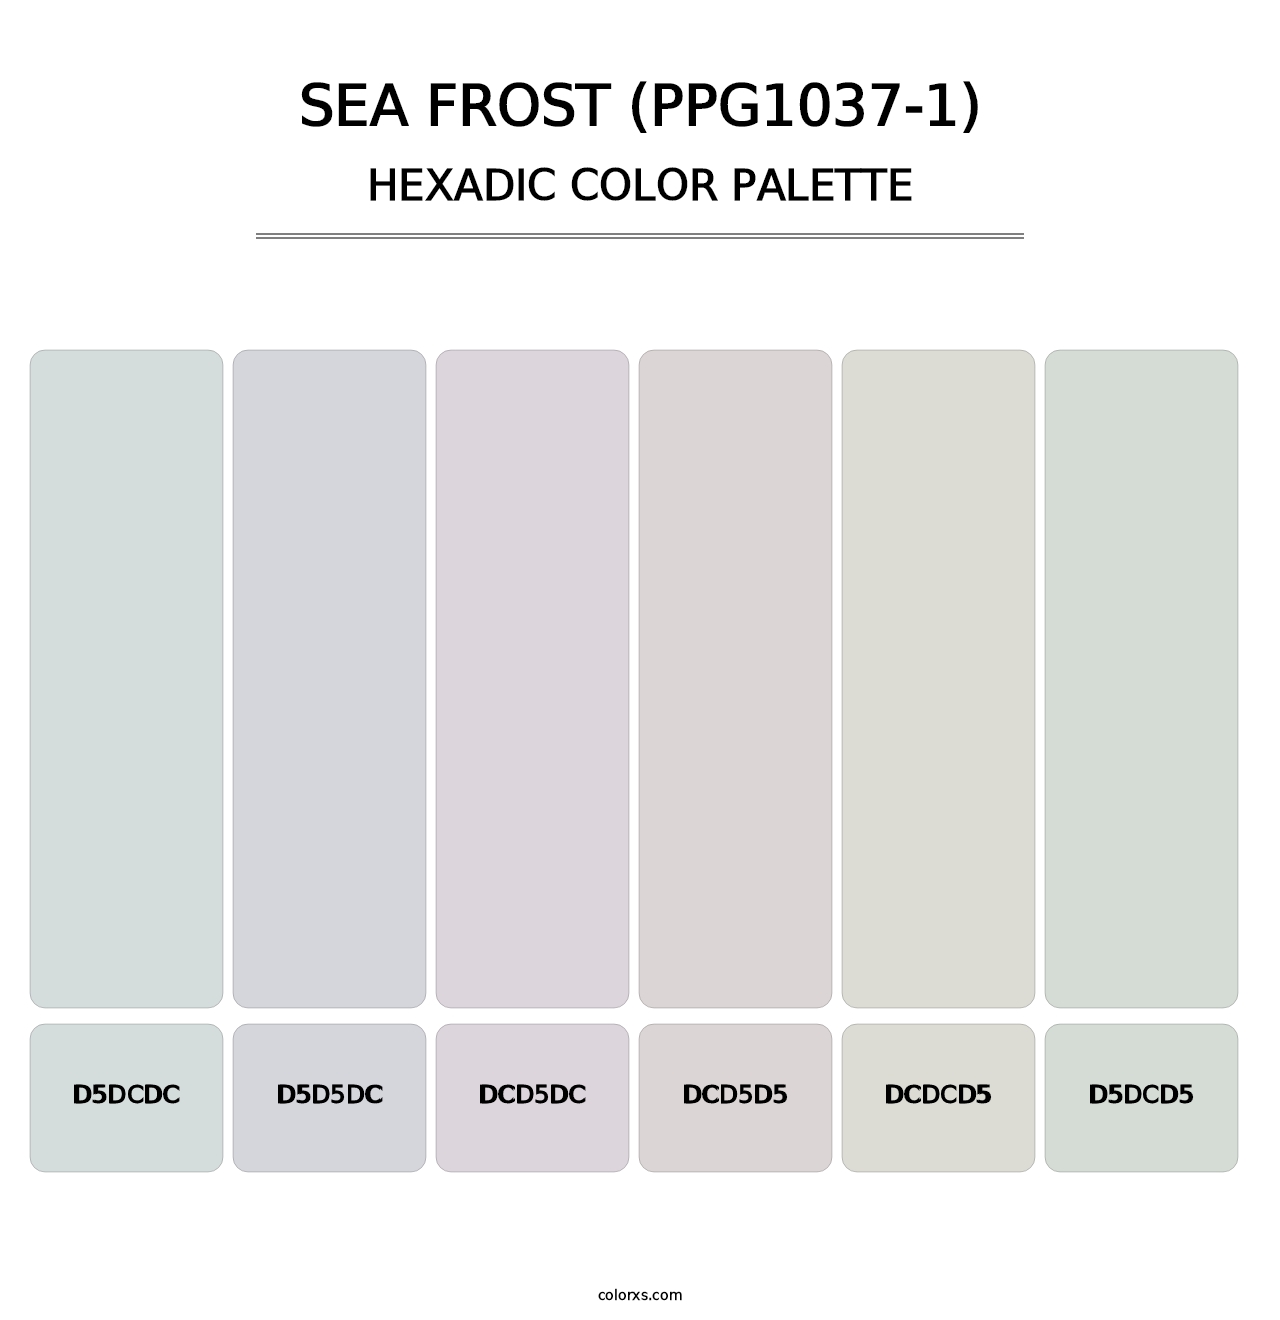 Sea Frost (PPG1037-1) - Hexadic Color Palette